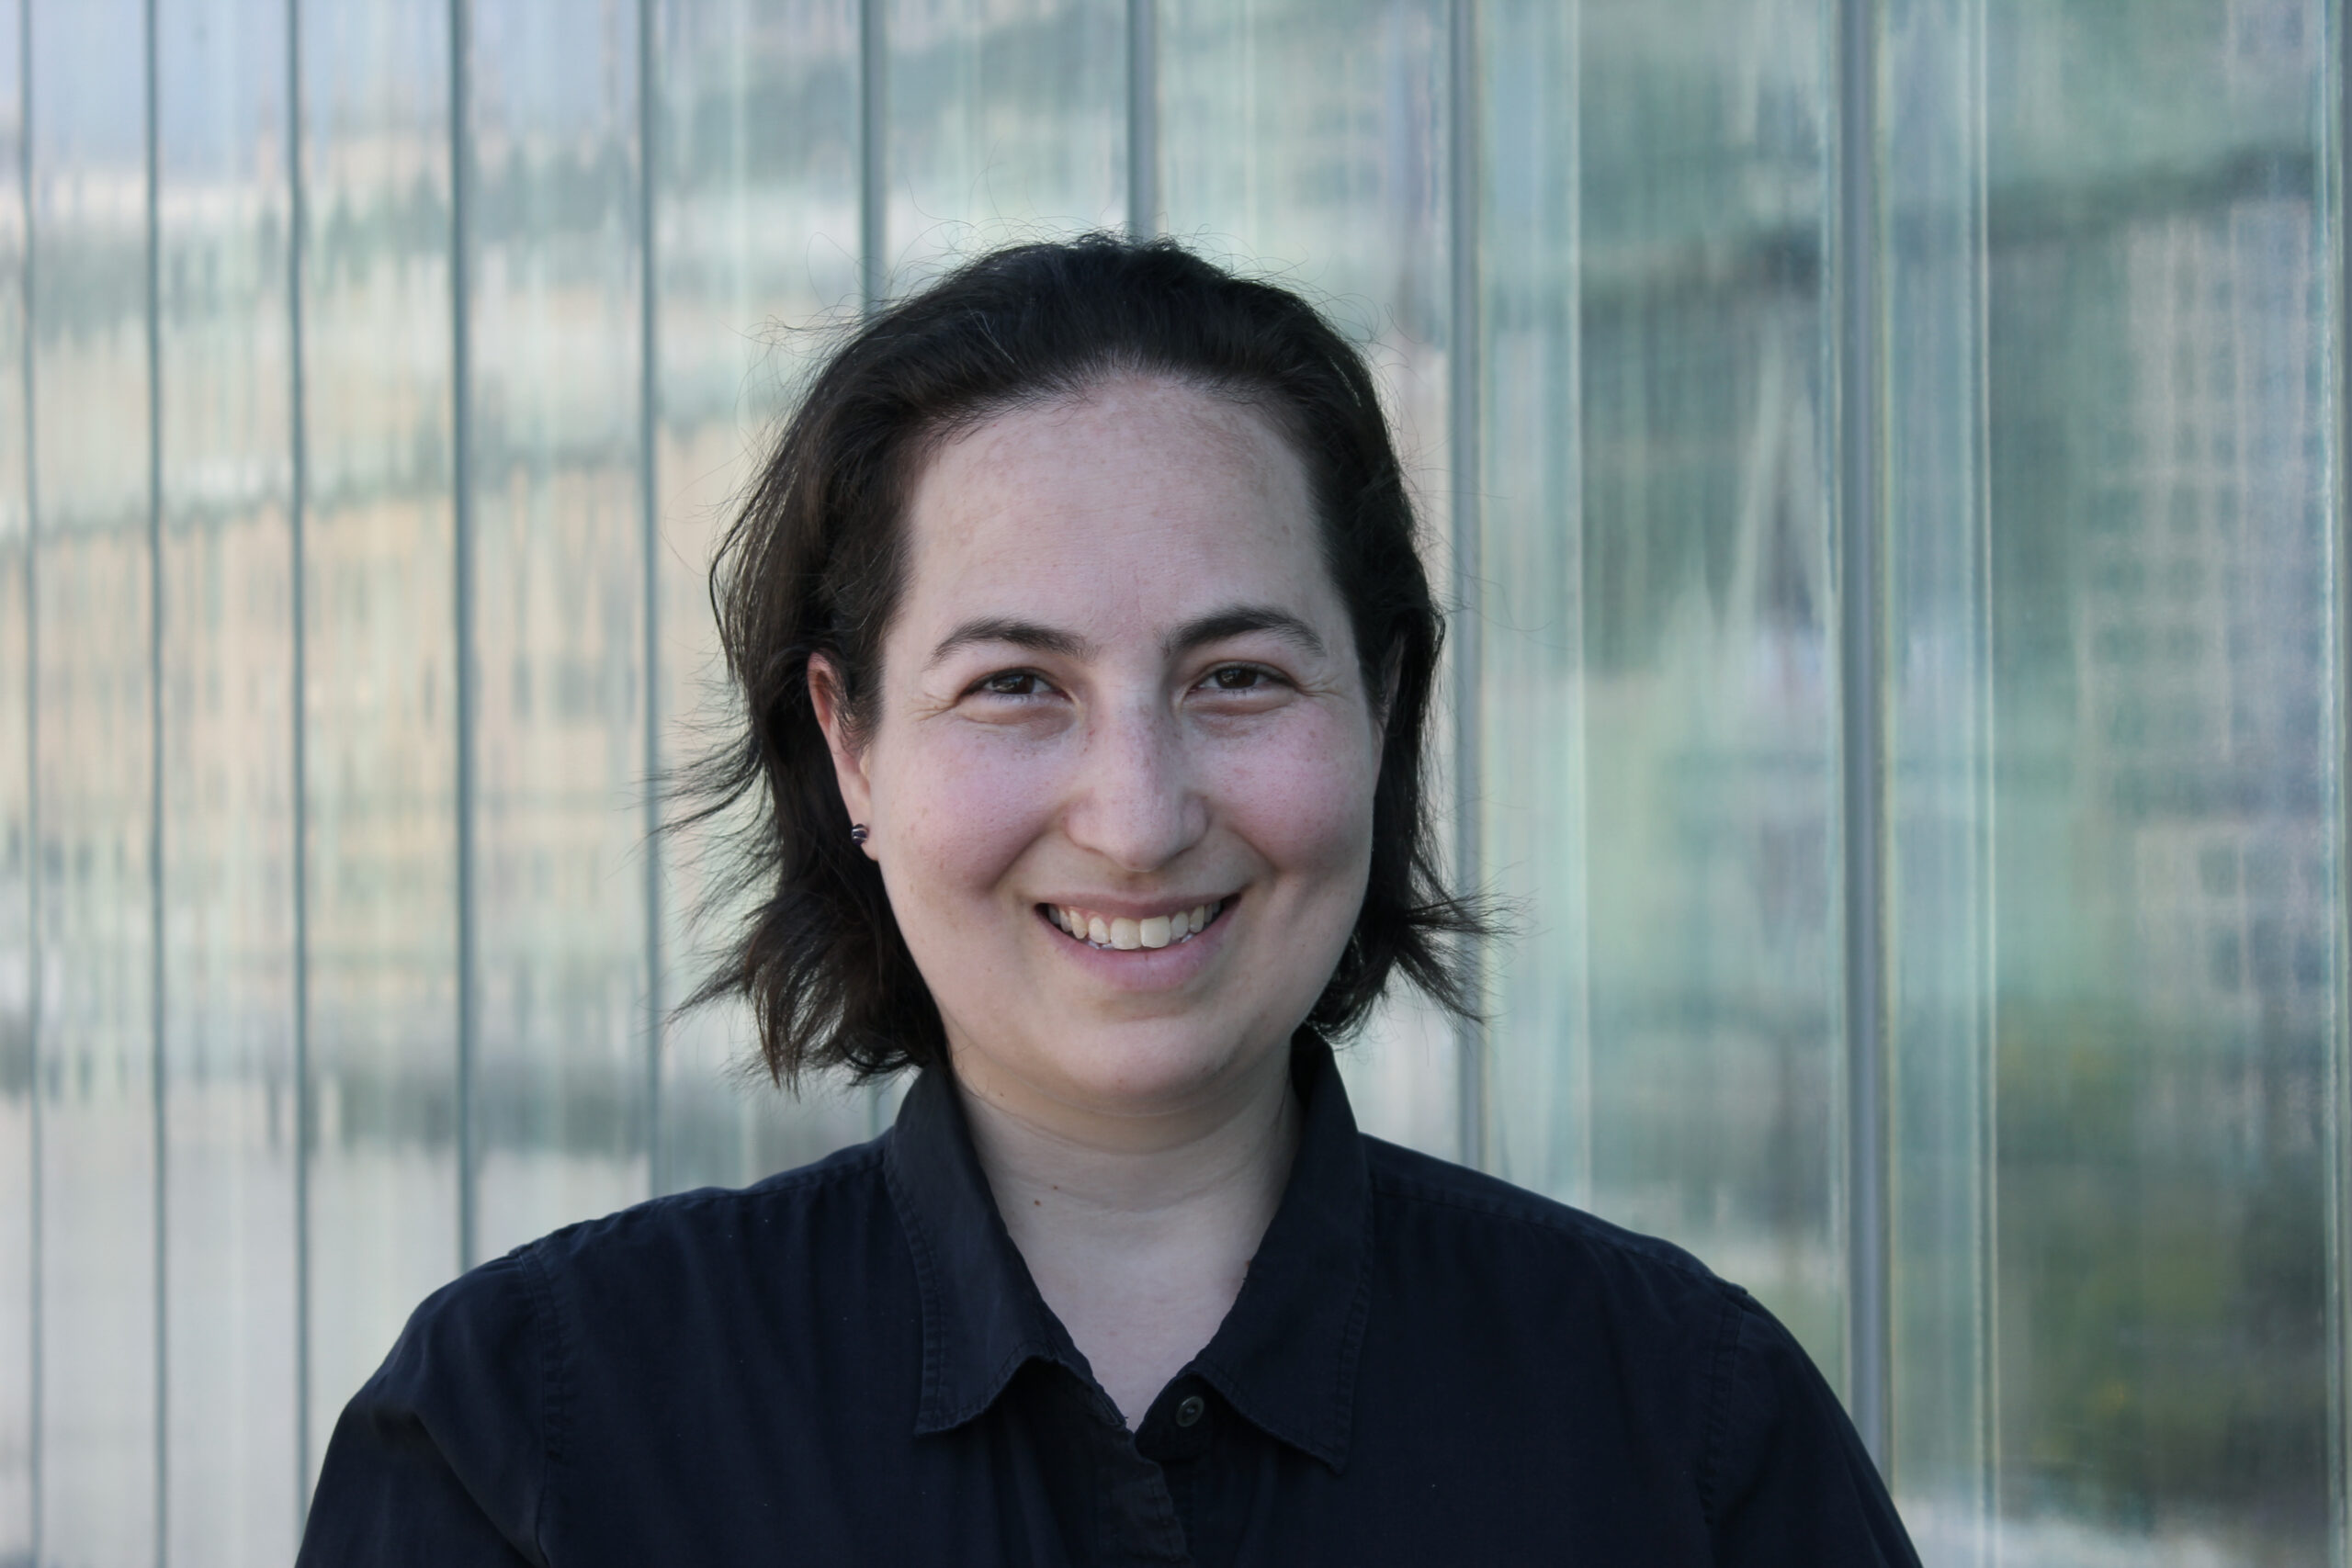 Headshot image of Mallory Taub, Assoc. AIA, AIANY COTE Co-Chair, Sustainability Director, Gensler